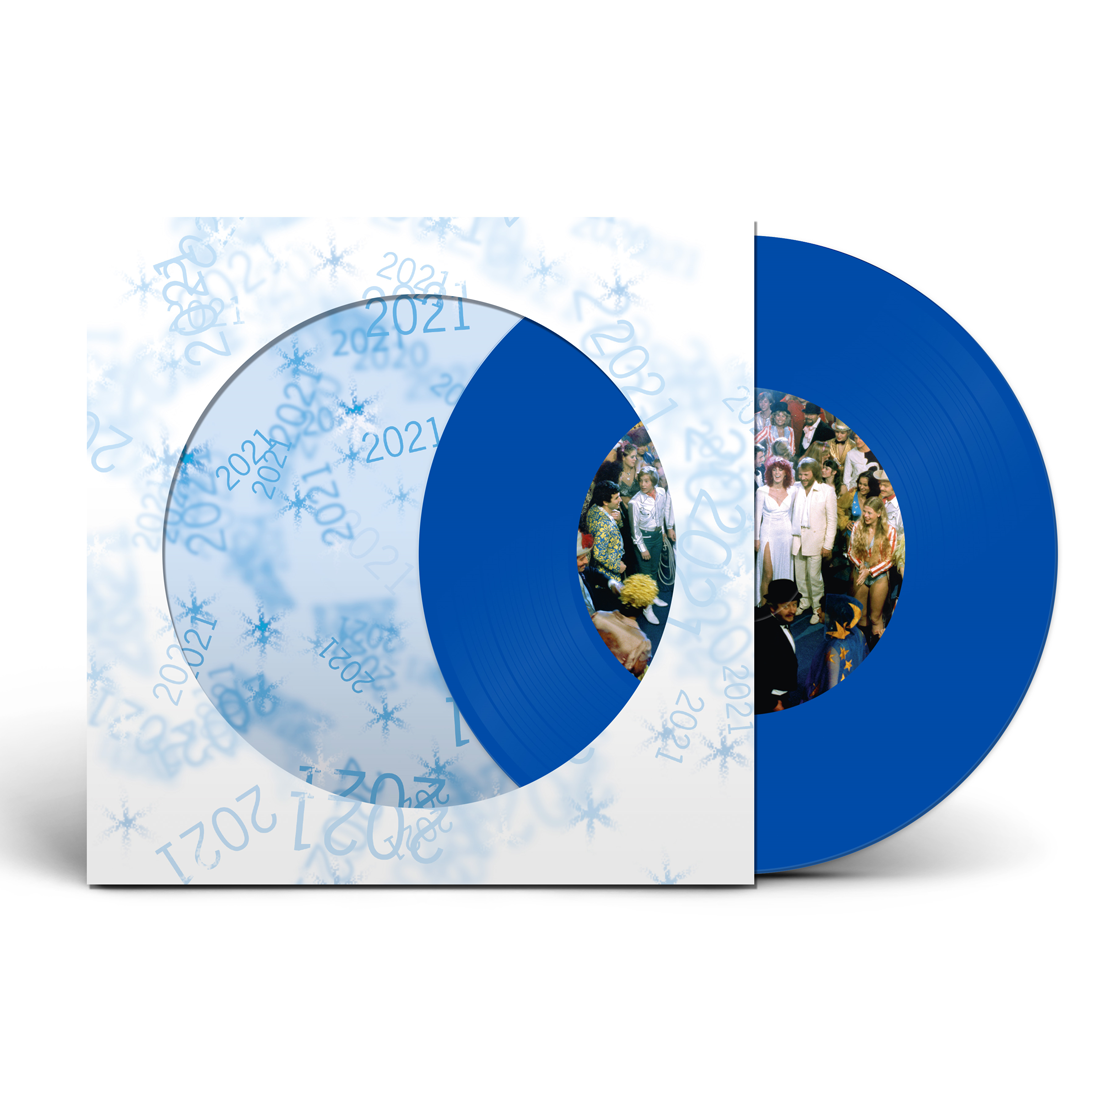 ABBA - Happy New Year: Limited Clear Blue Vinyl 7" Single